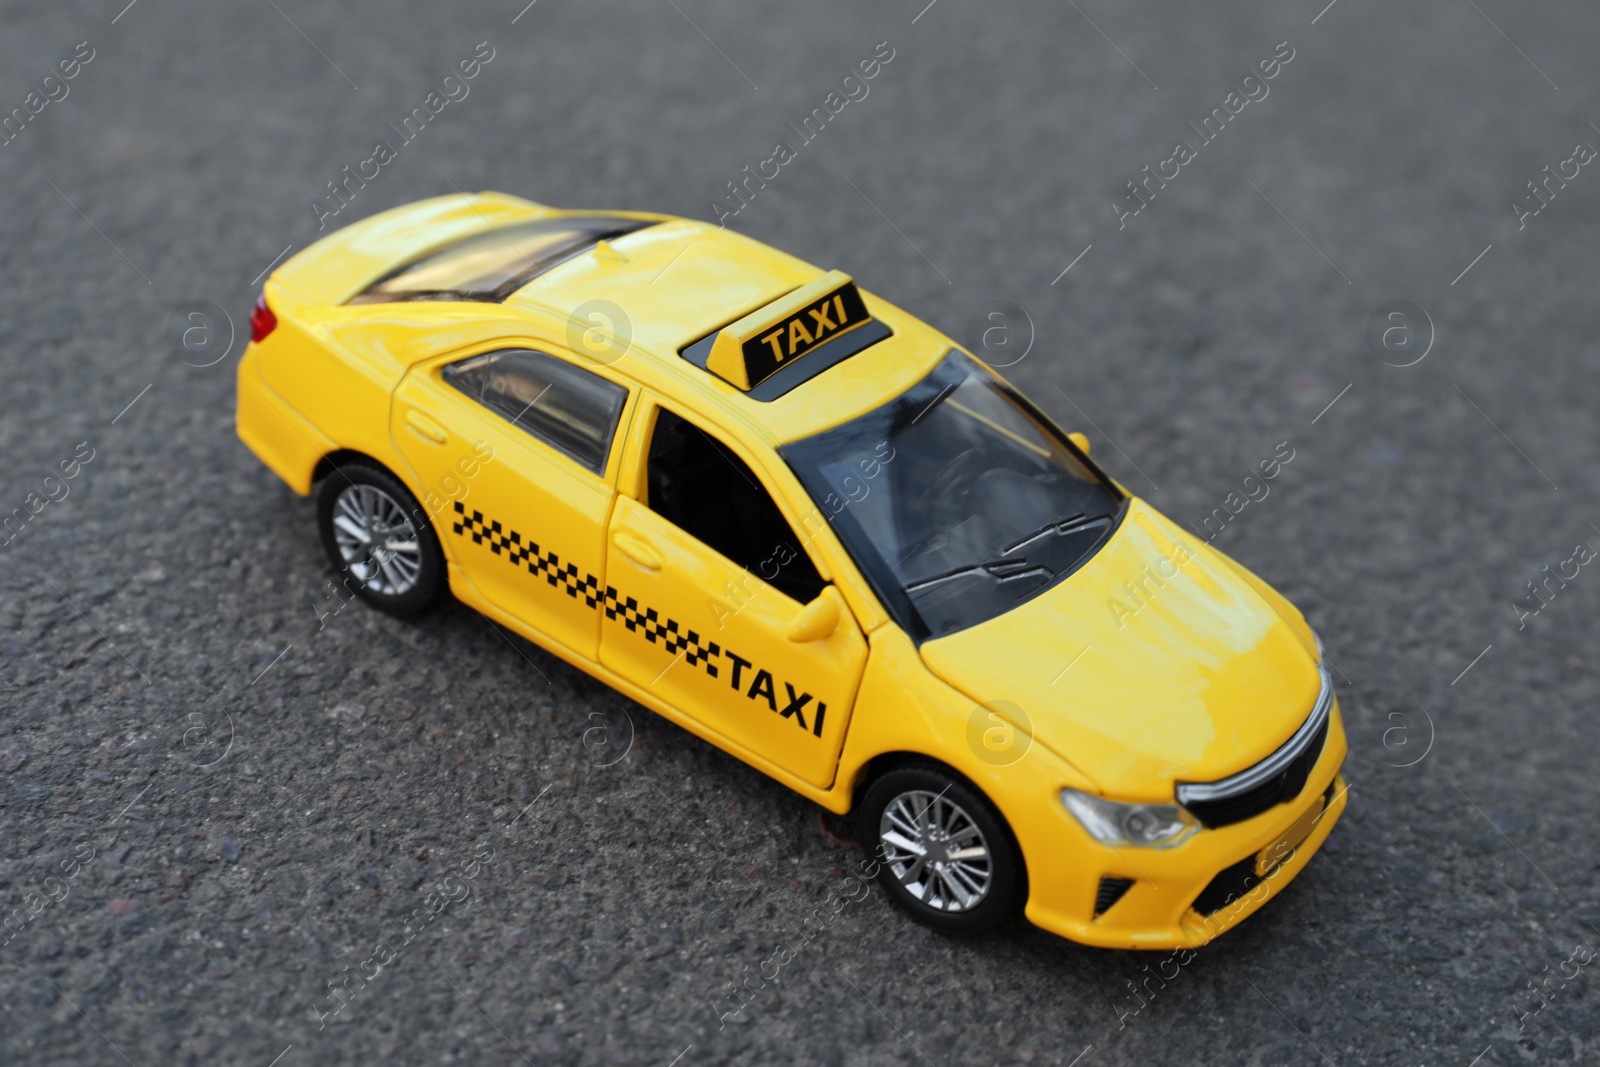 Photo of Yellow taxi car model on city street